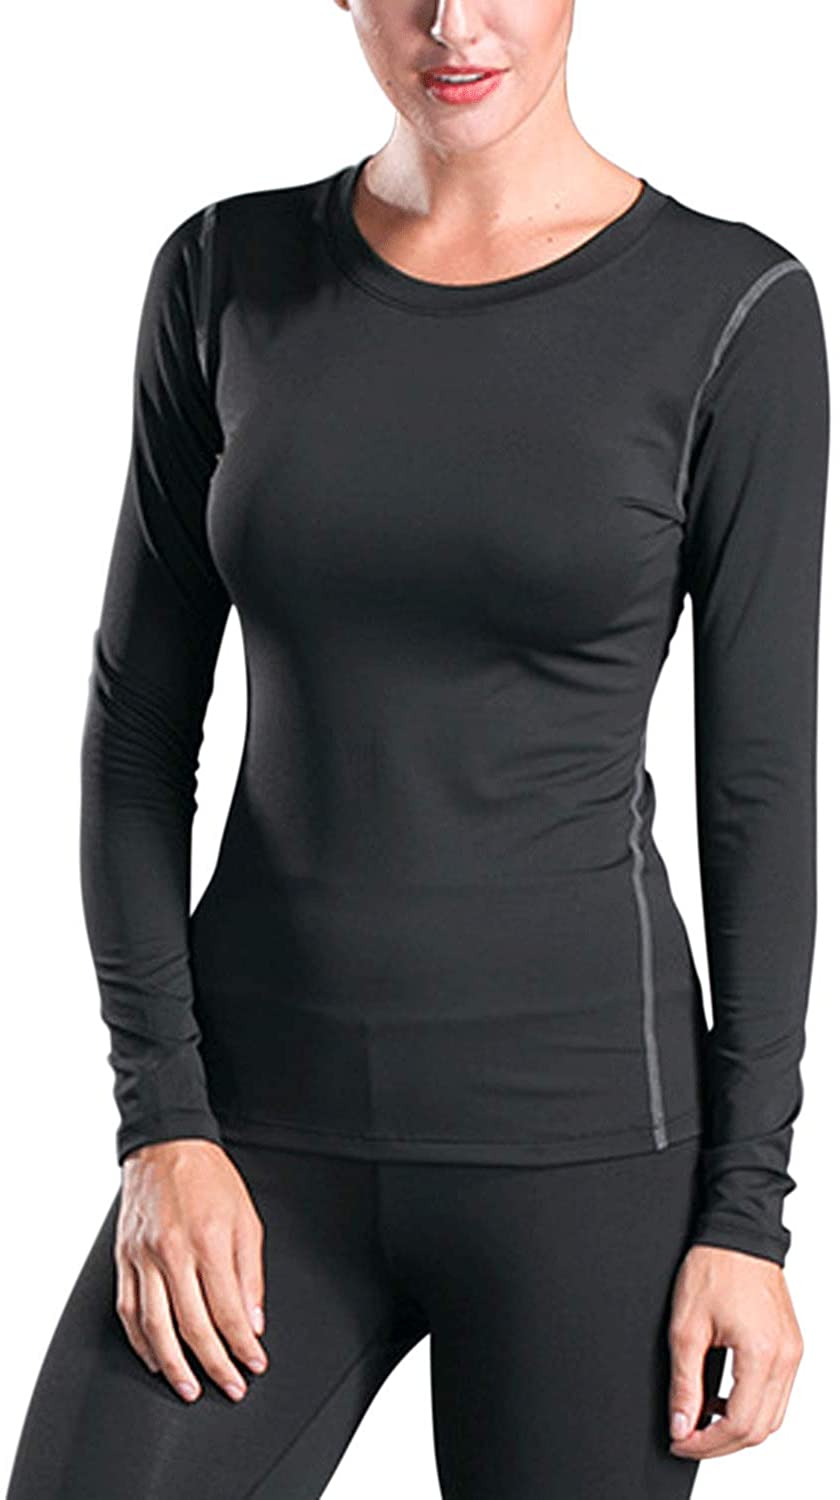 WANAYOU Women's Compression Shirt Dry Fit Long Sleeve Running Athletic ...